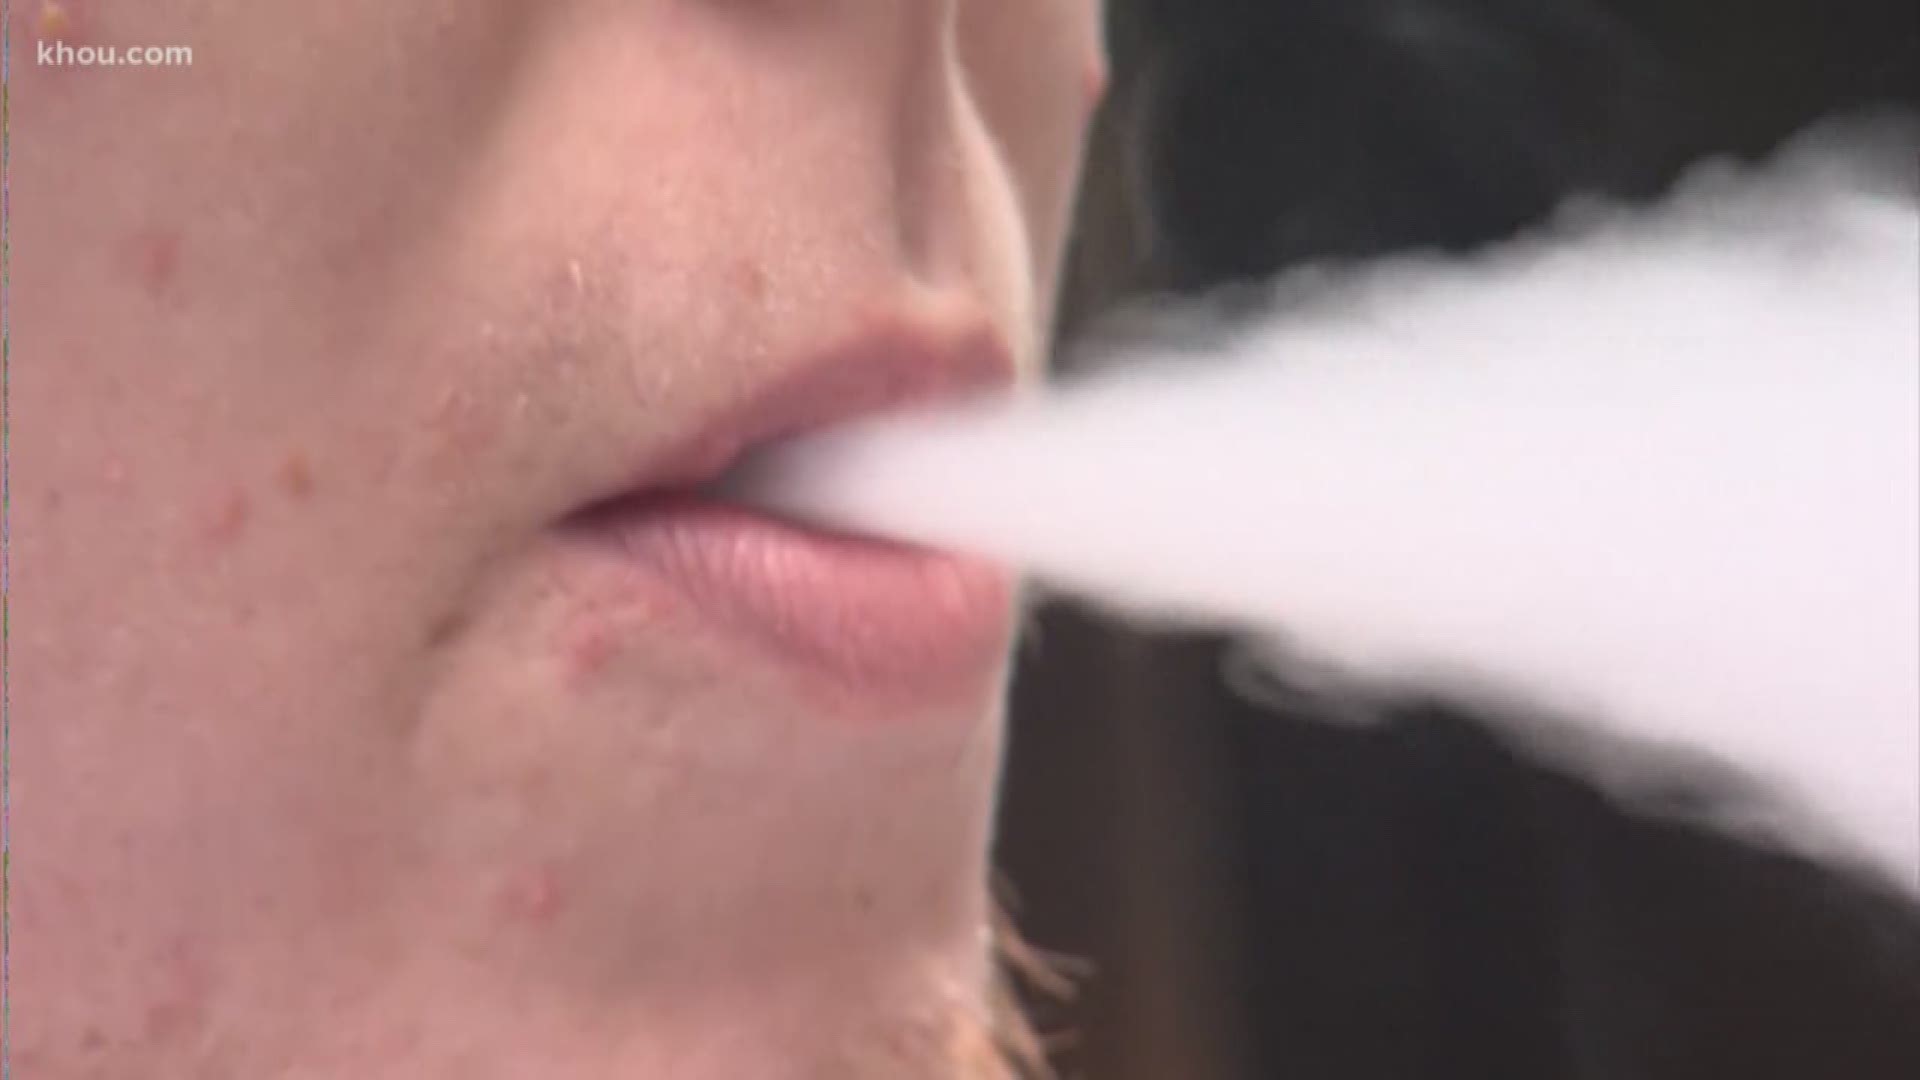 According to the latest federal data, the percentage of high school age children reporting e-cigarette use in the past 30 days rose 75 percent from last year.